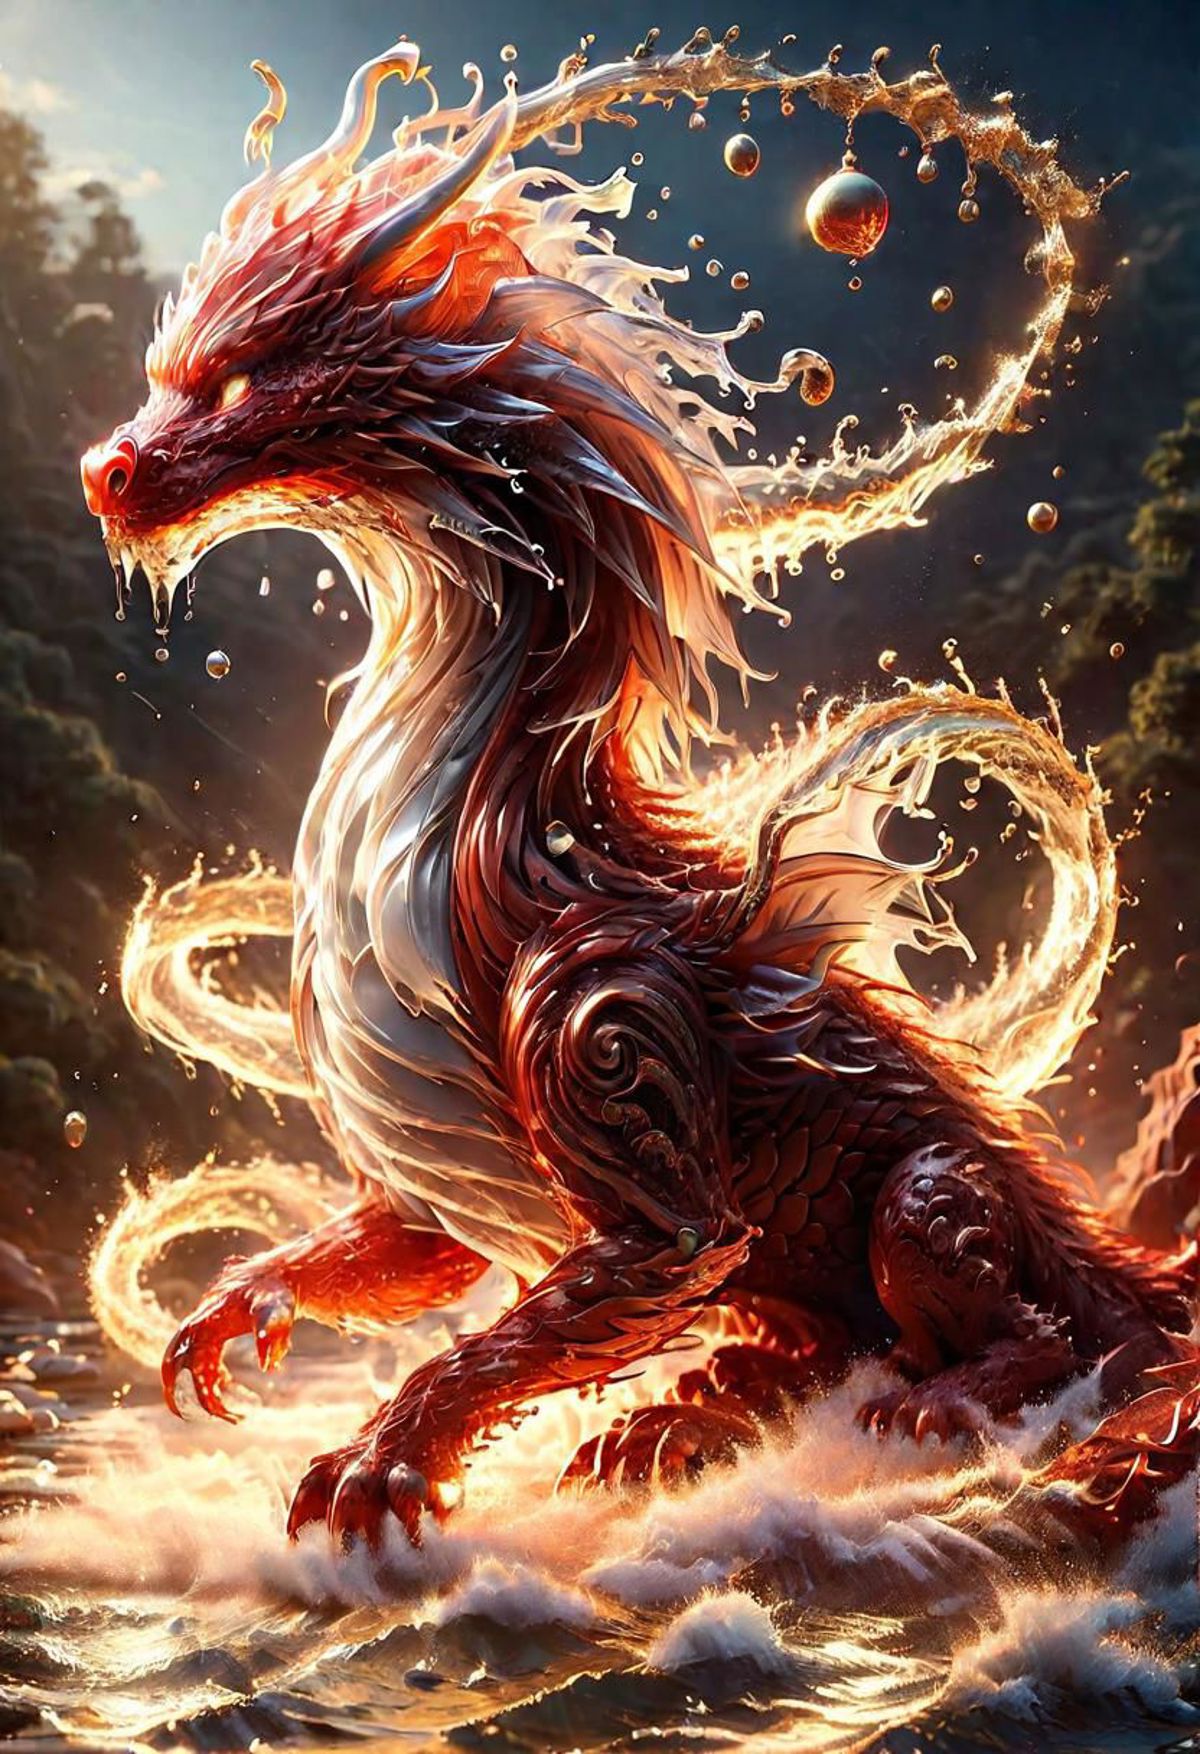 A fiery dragon with a long tail and a red and white body.